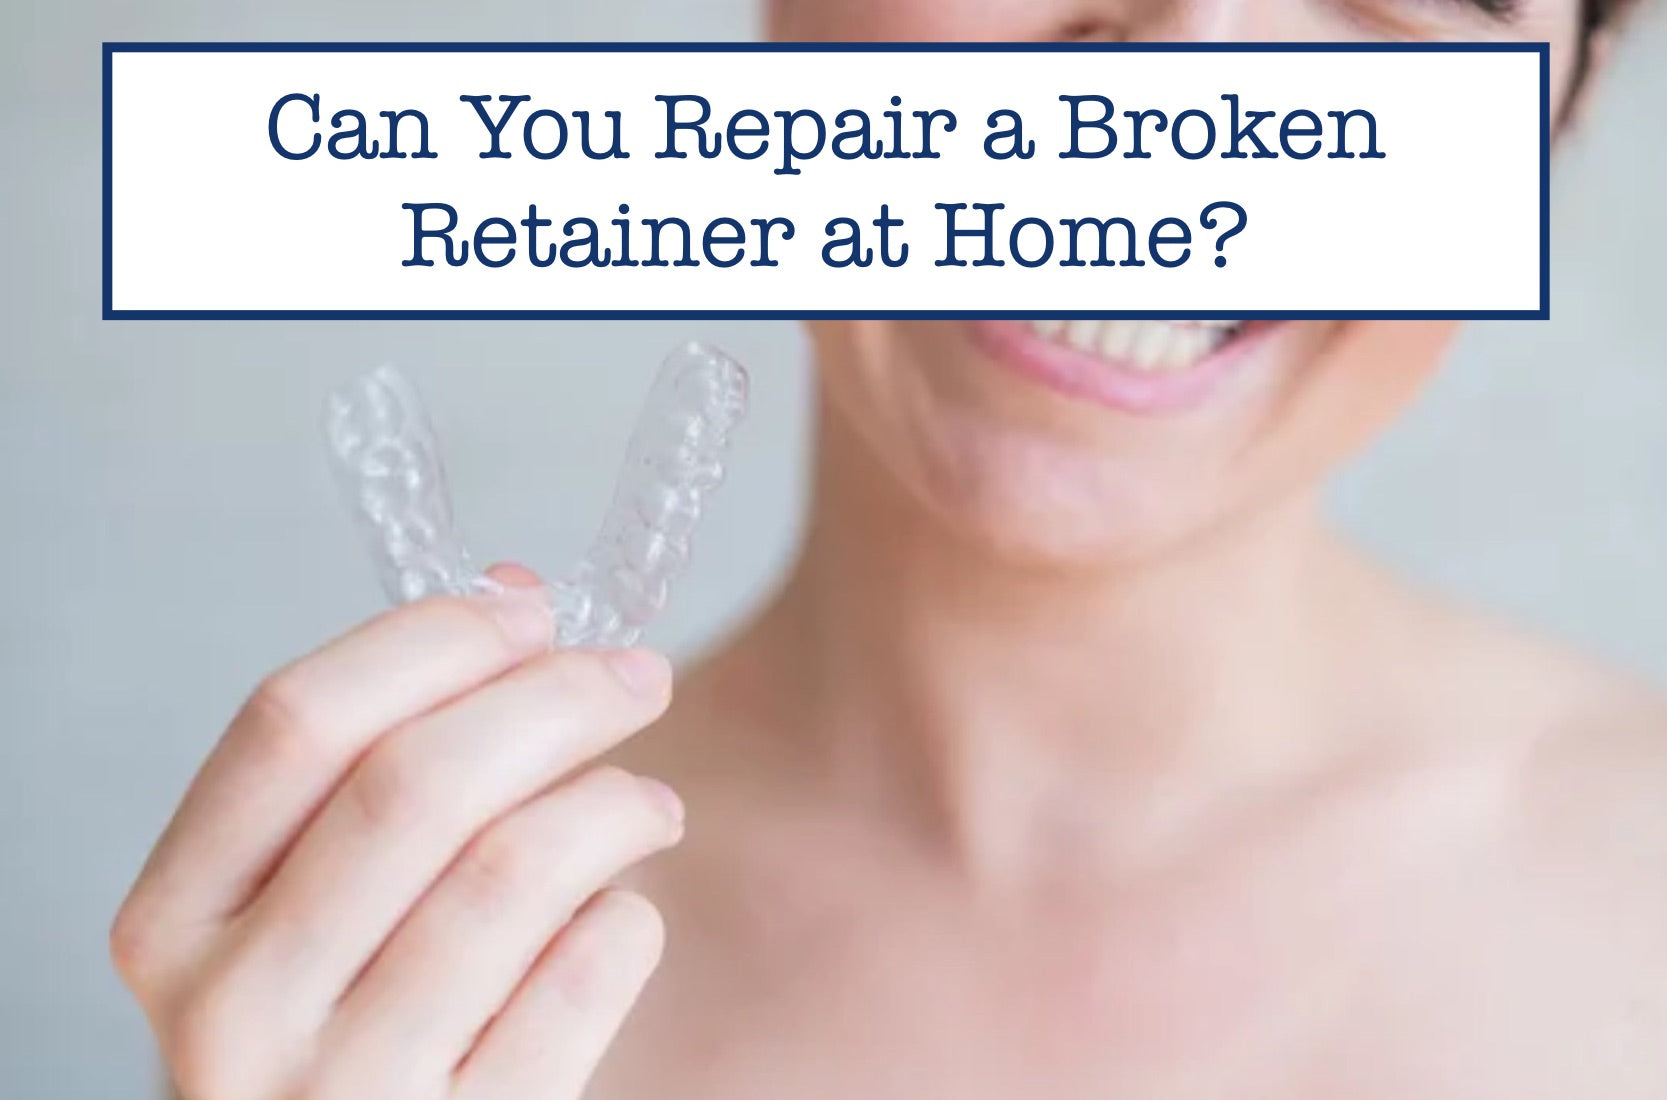 Can You Repair a Broken Retainer at Home?